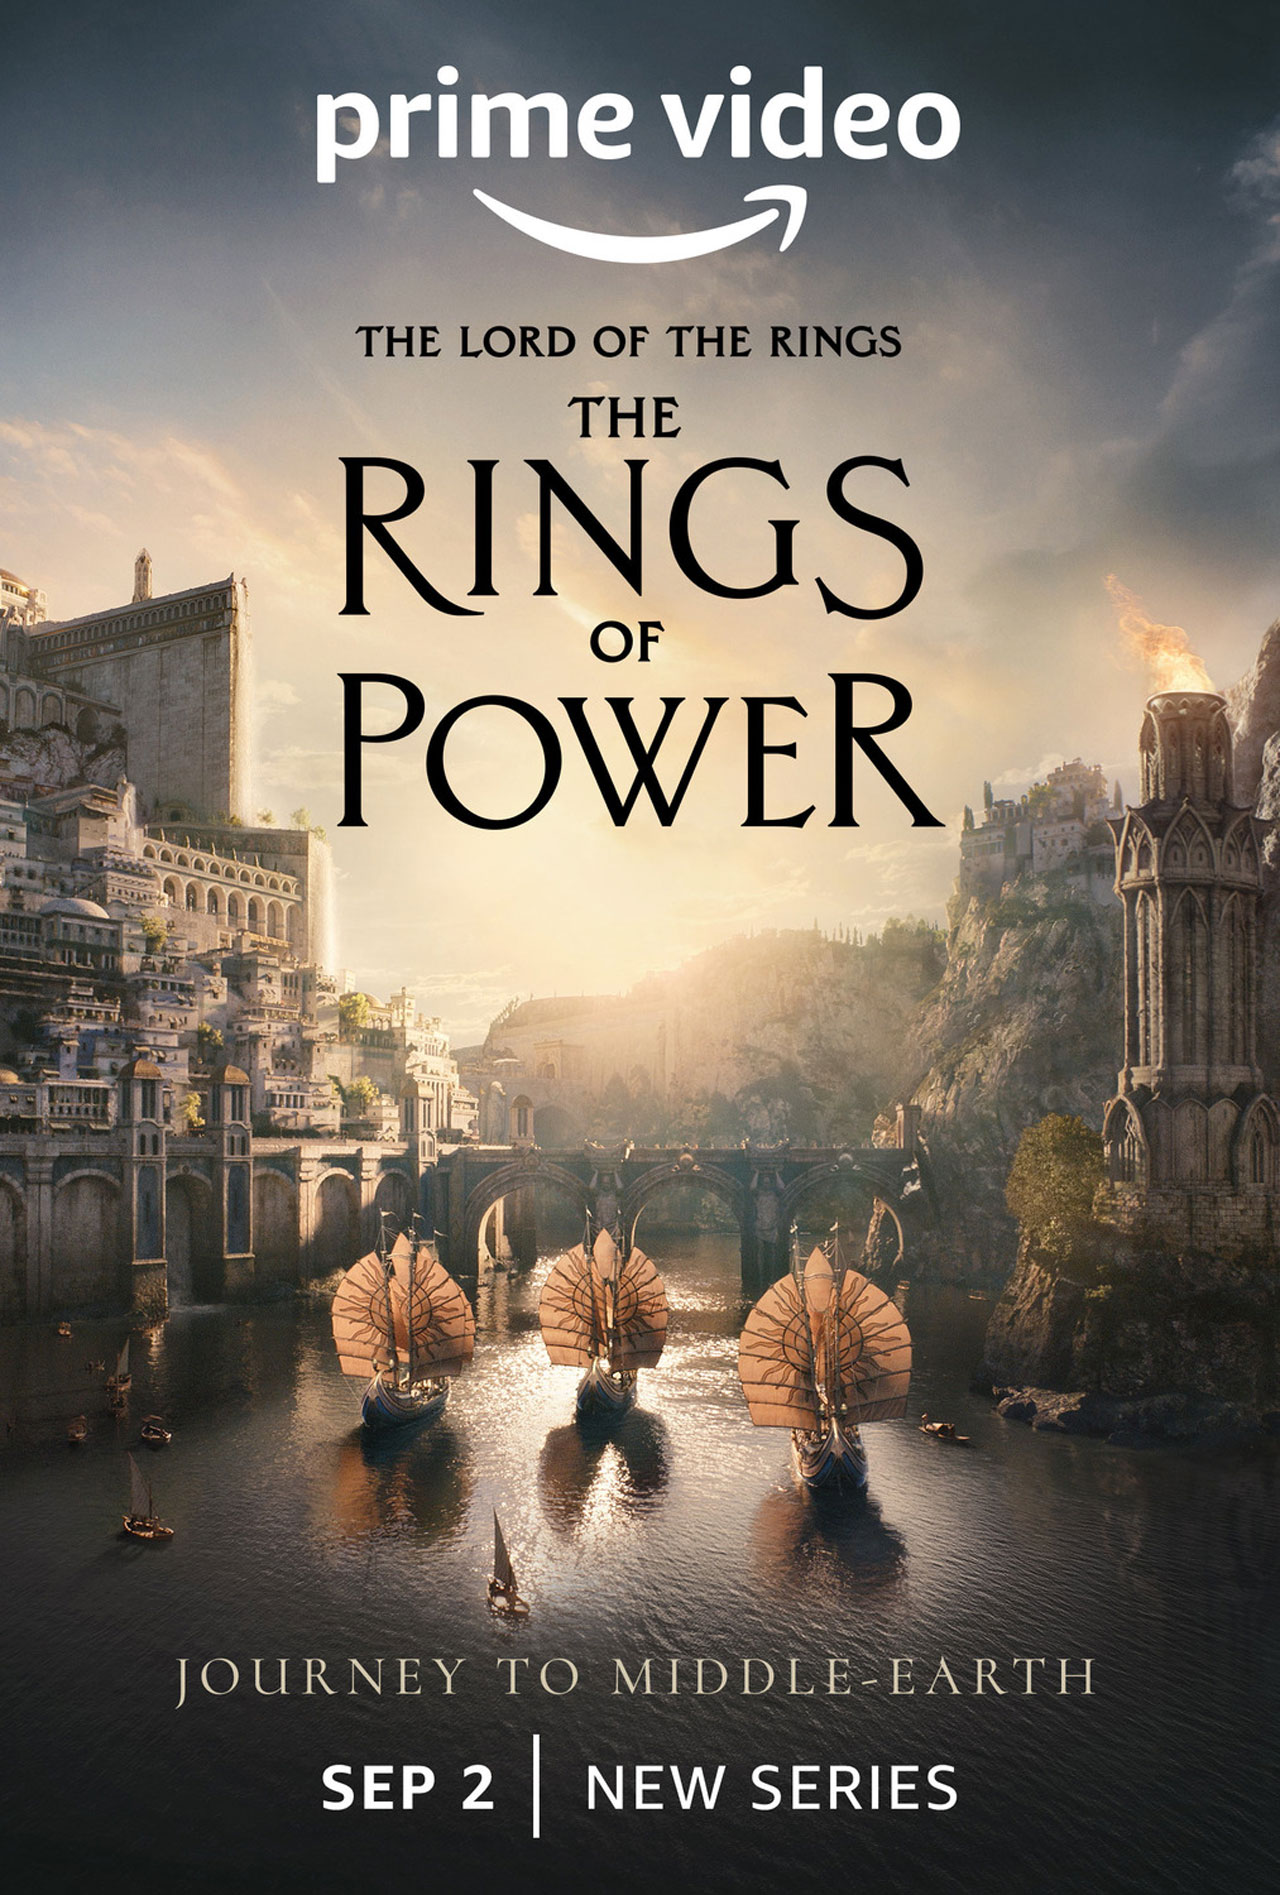 The Lord of the Rings: The Rings of Power -  Prime Video Series -  Where To Watch